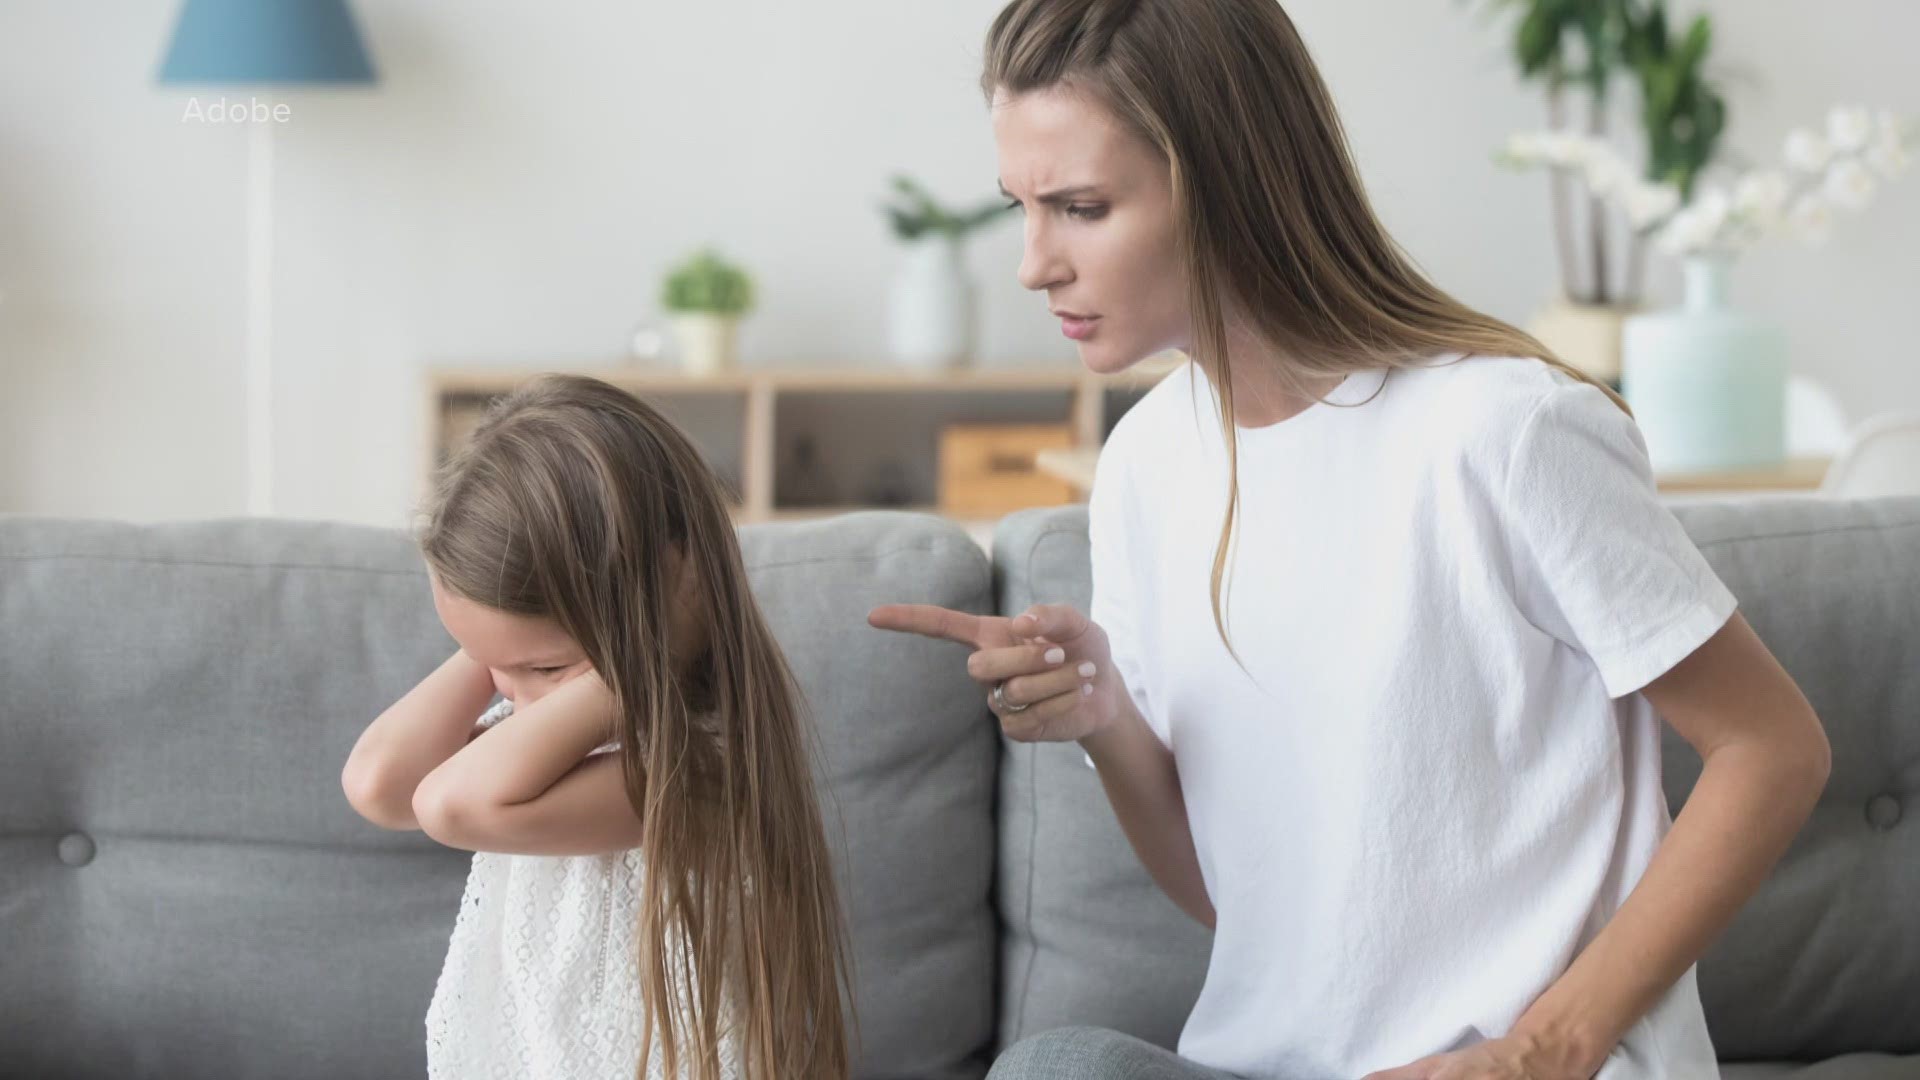 Tantrums can be embarrassing for parents, but sometimes YOUR behavior makes them worse.